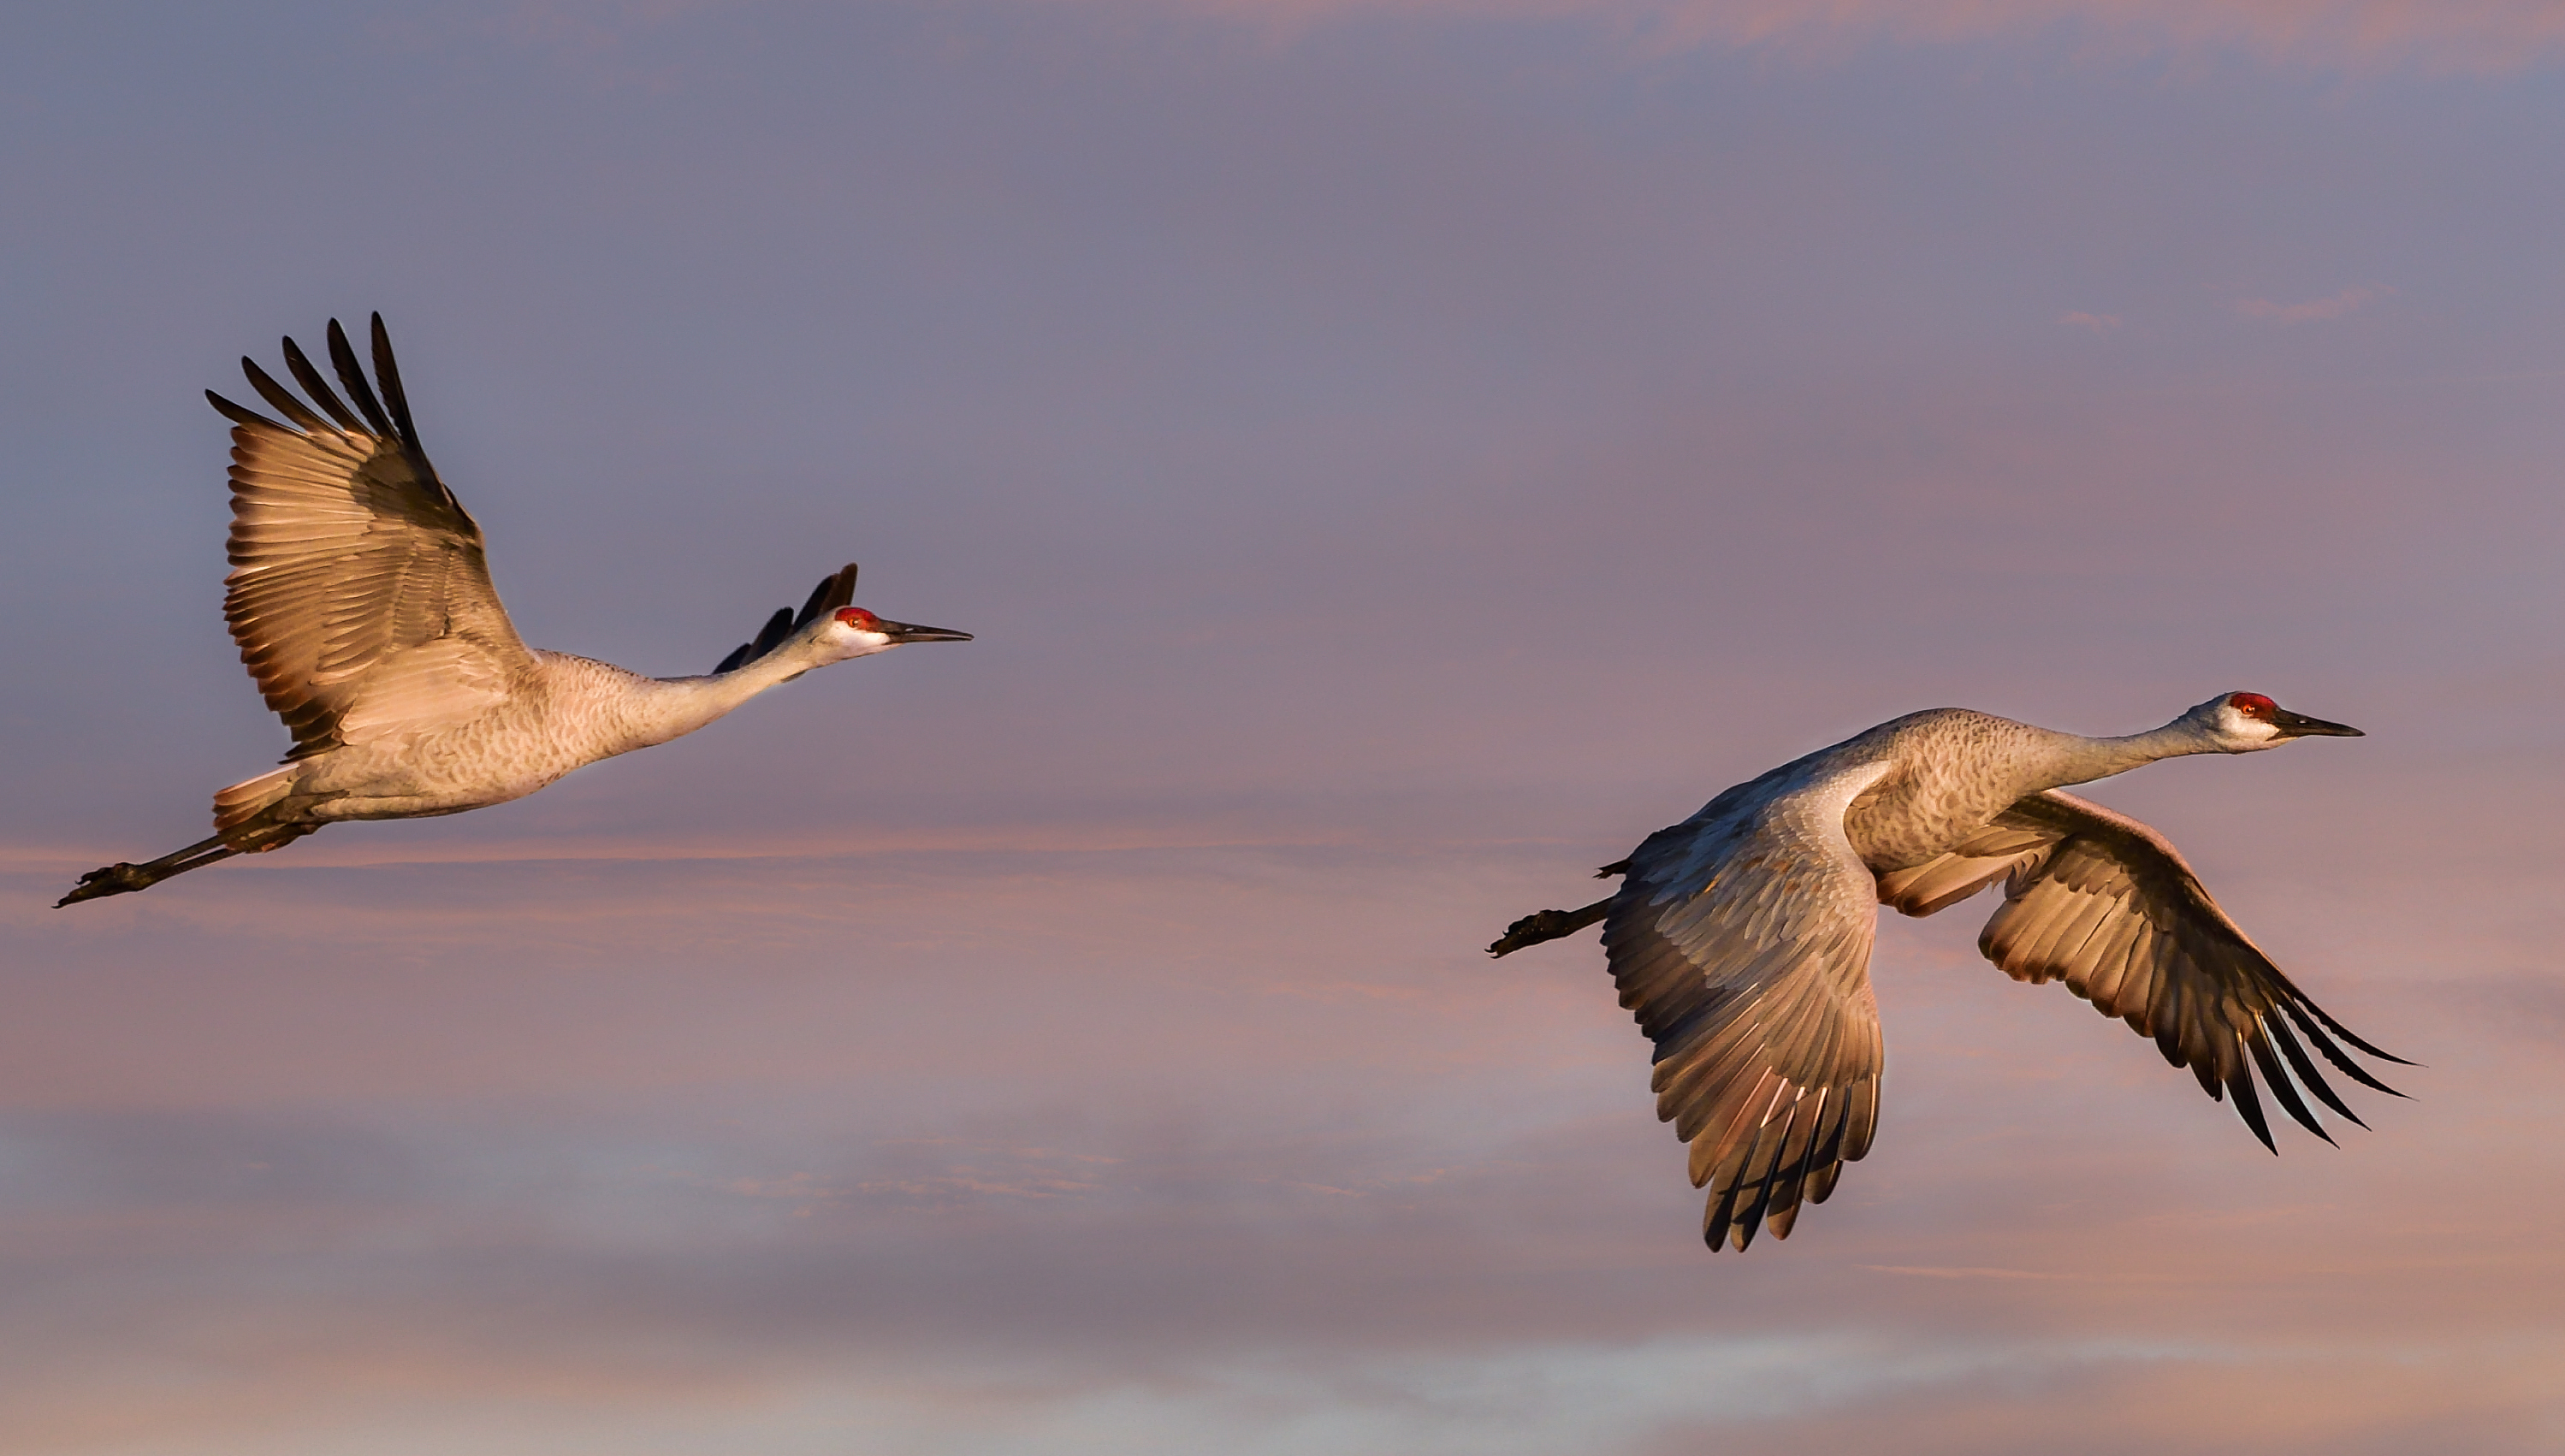 Two Sandhill Cranes fly in the sky at dusk